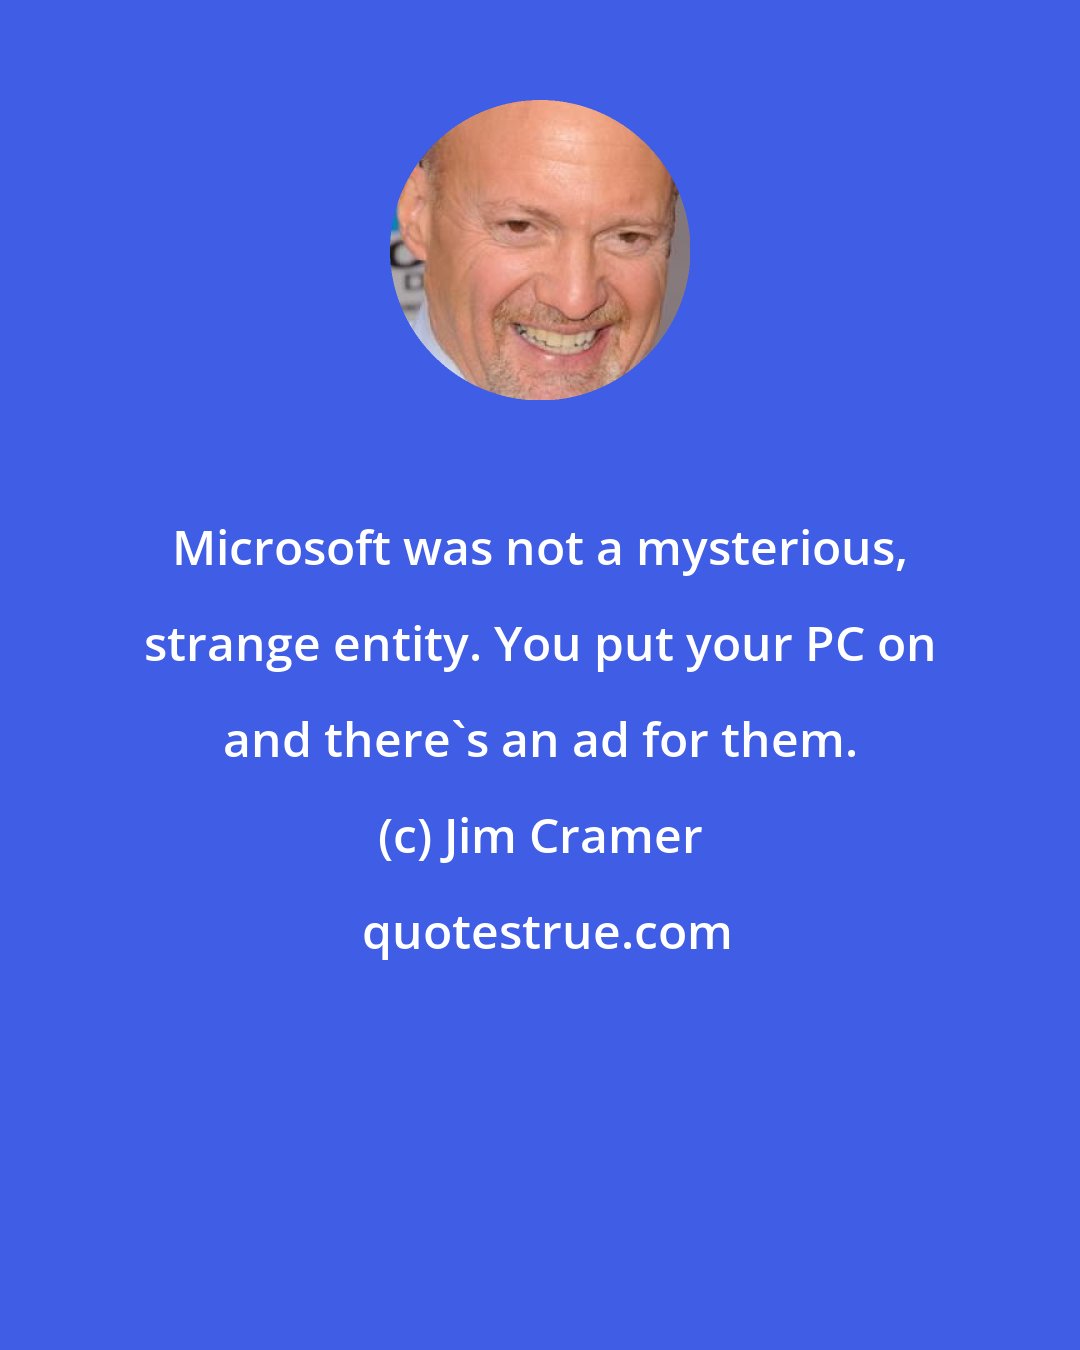 Jim Cramer: Microsoft was not a mysterious, strange entity. You put your PC on and there's an ad for them.